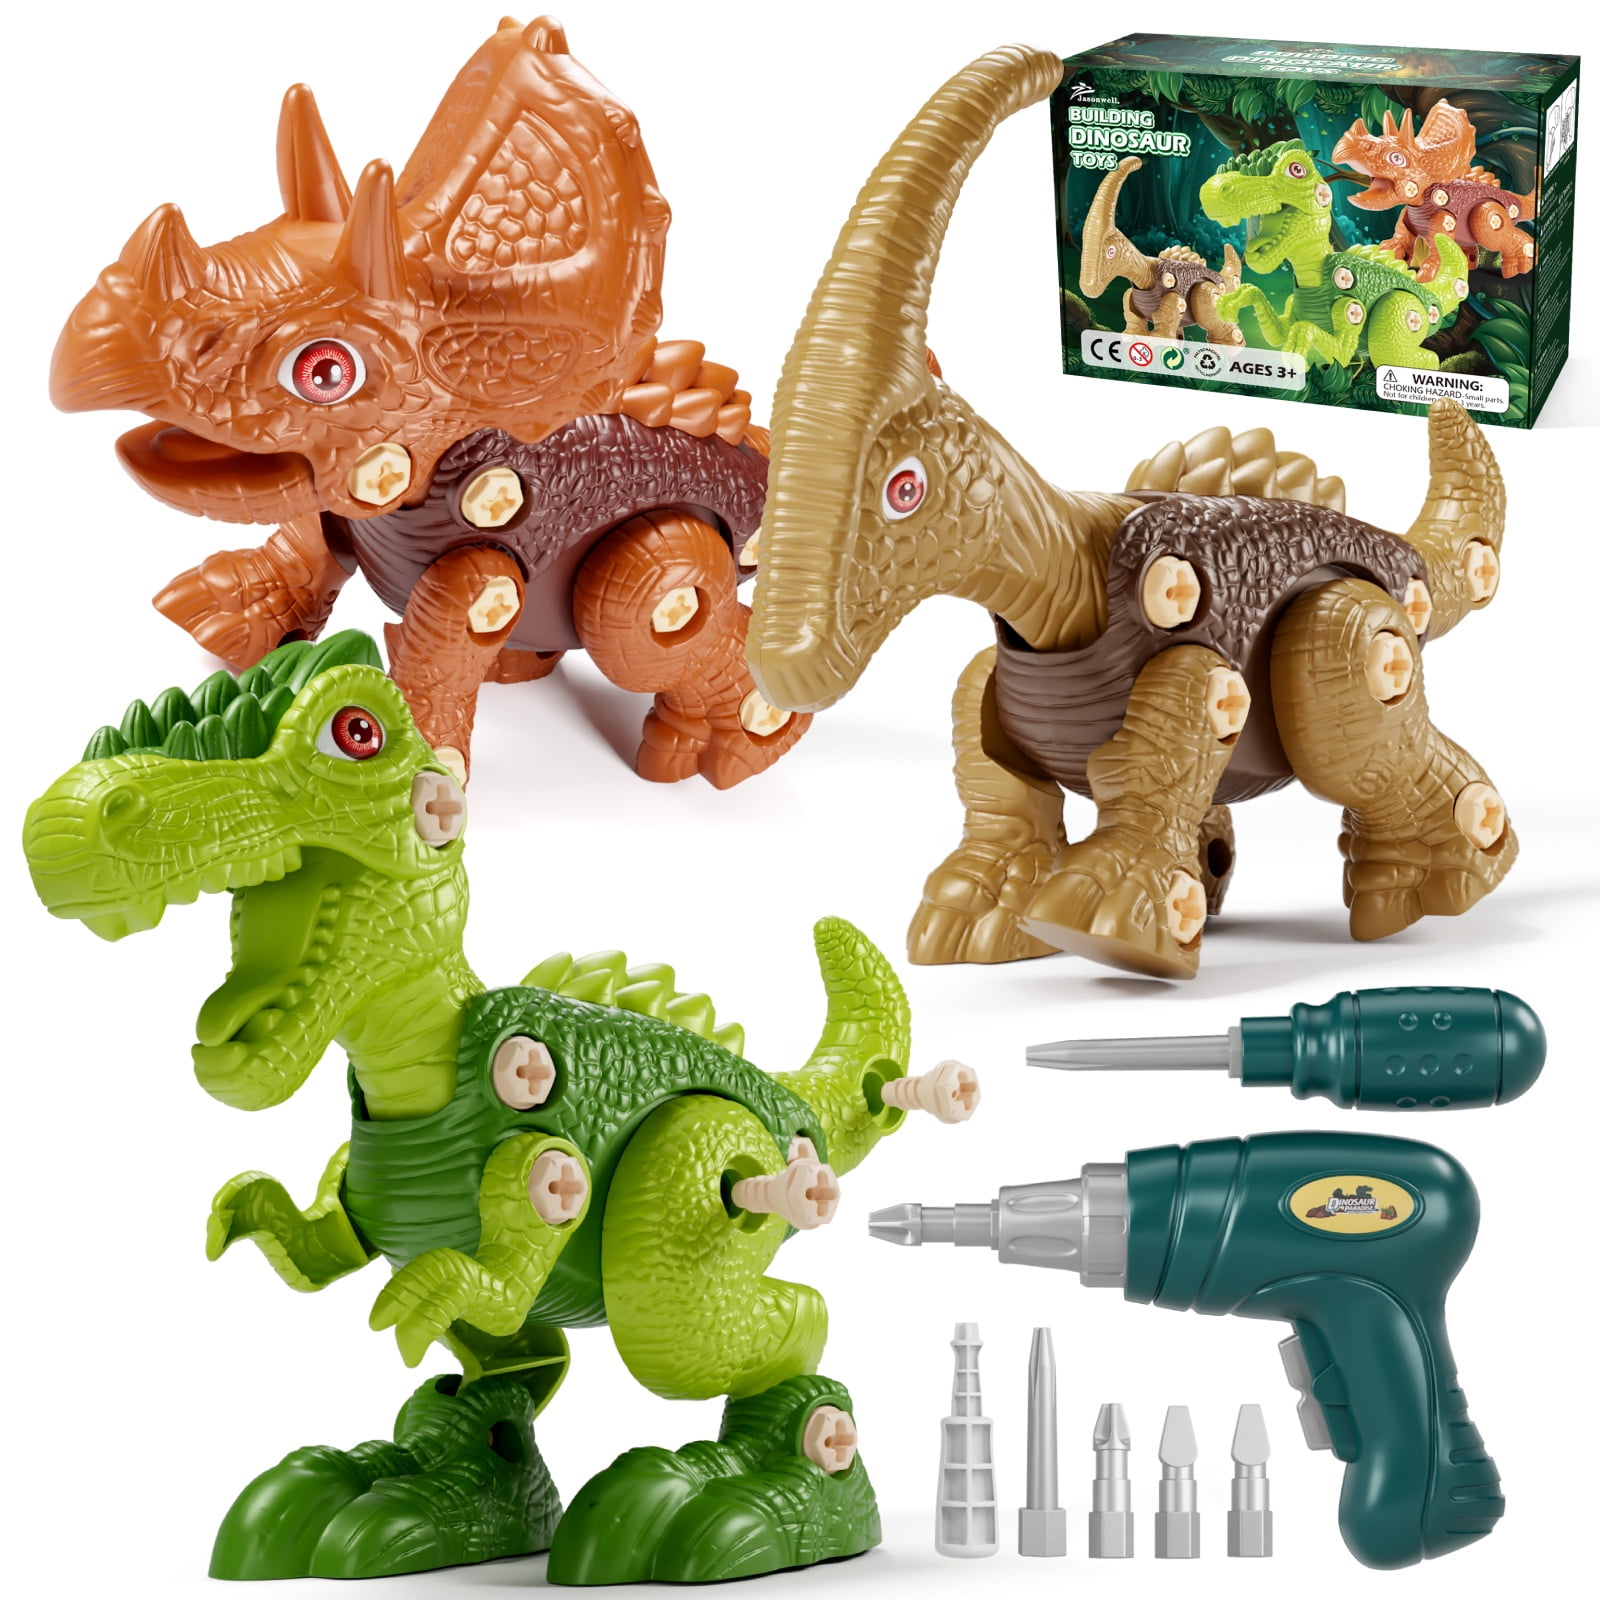 5PCS Boys STEM Educational Take Apart Construction Set Learning Kit Creative Activities Games Birthday Gifts for Toddlers Girls Age 3 4 5 6 7 8 Years Old Jasonwell Kids Building Dinosaur Toys 